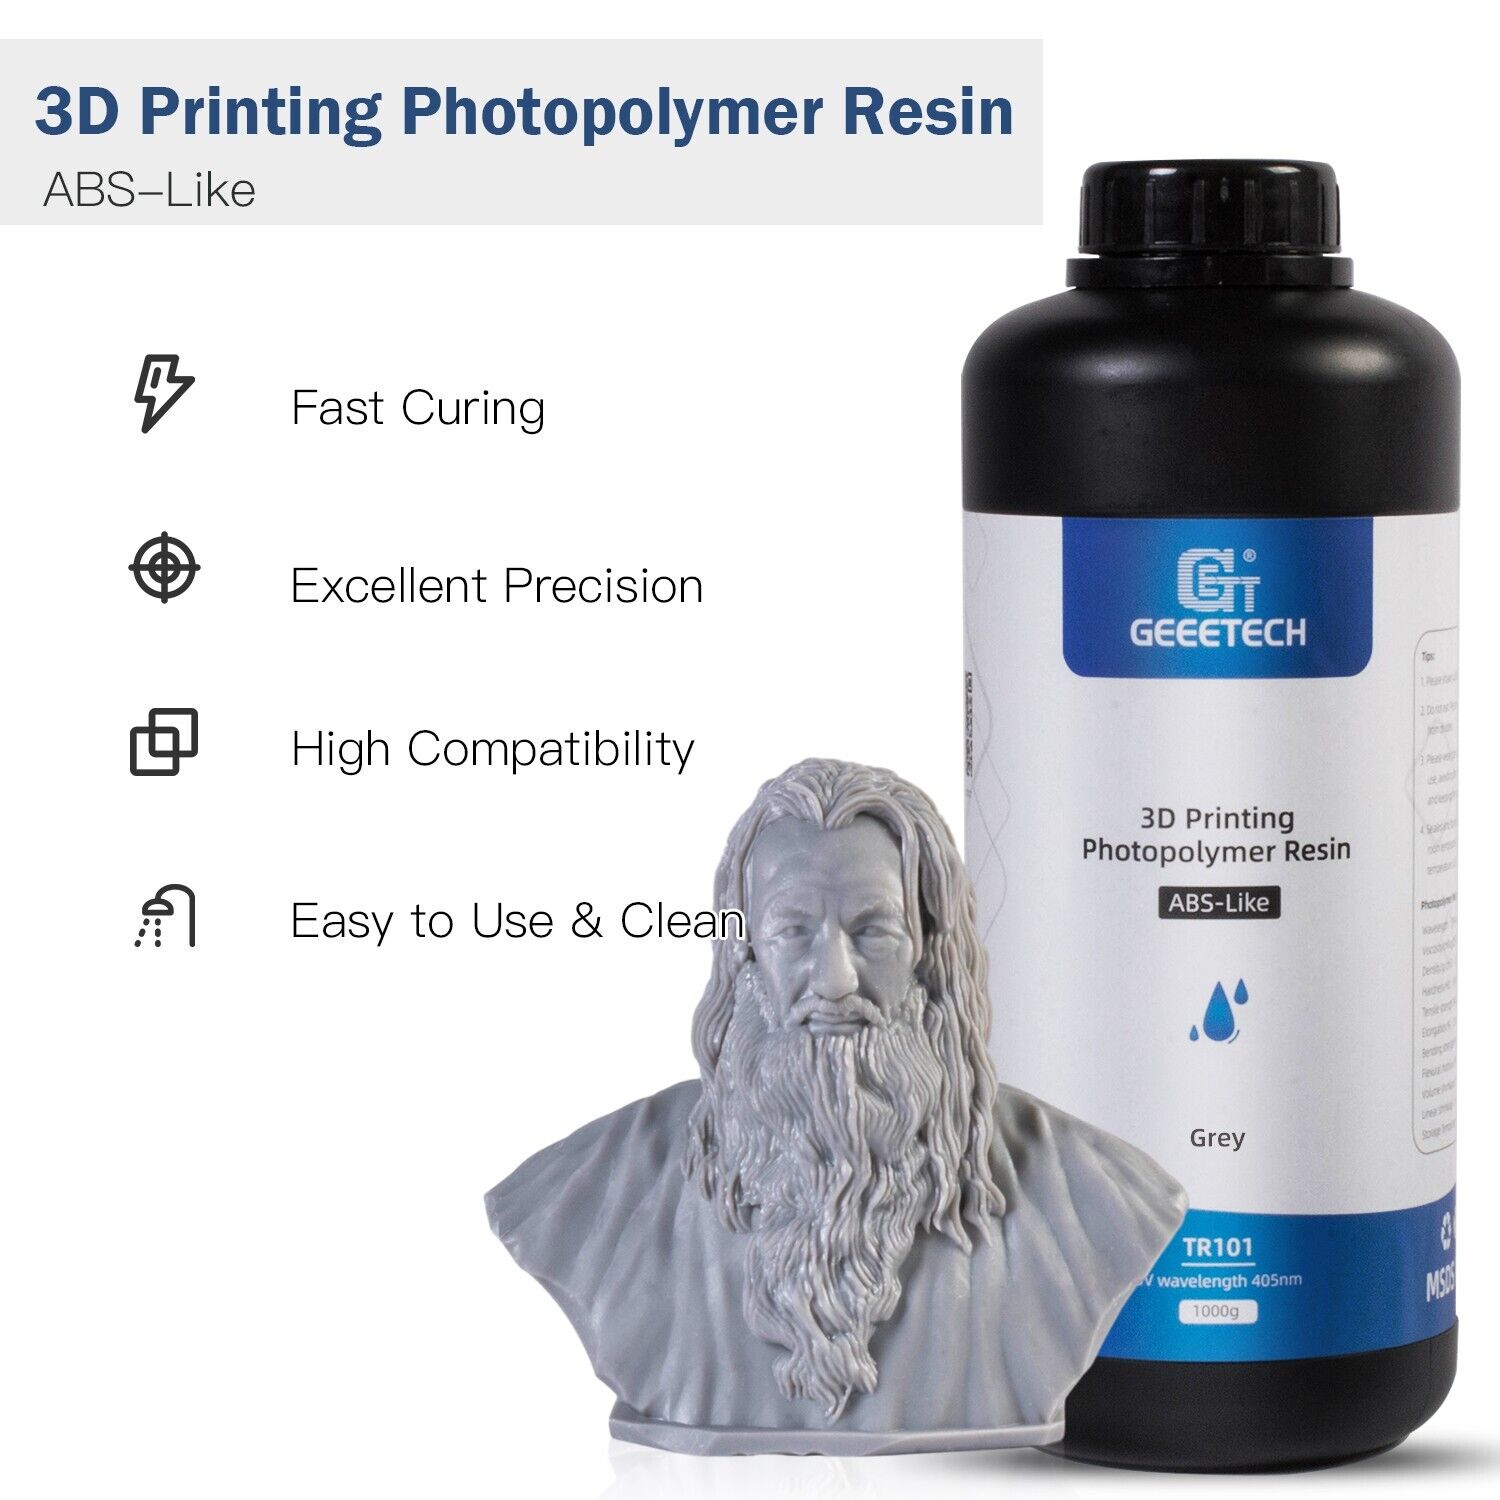 Geeetech ABS-Like Resin 3D Photopolymer Resin Gray 1kg for LCD/DLP 3D Printer